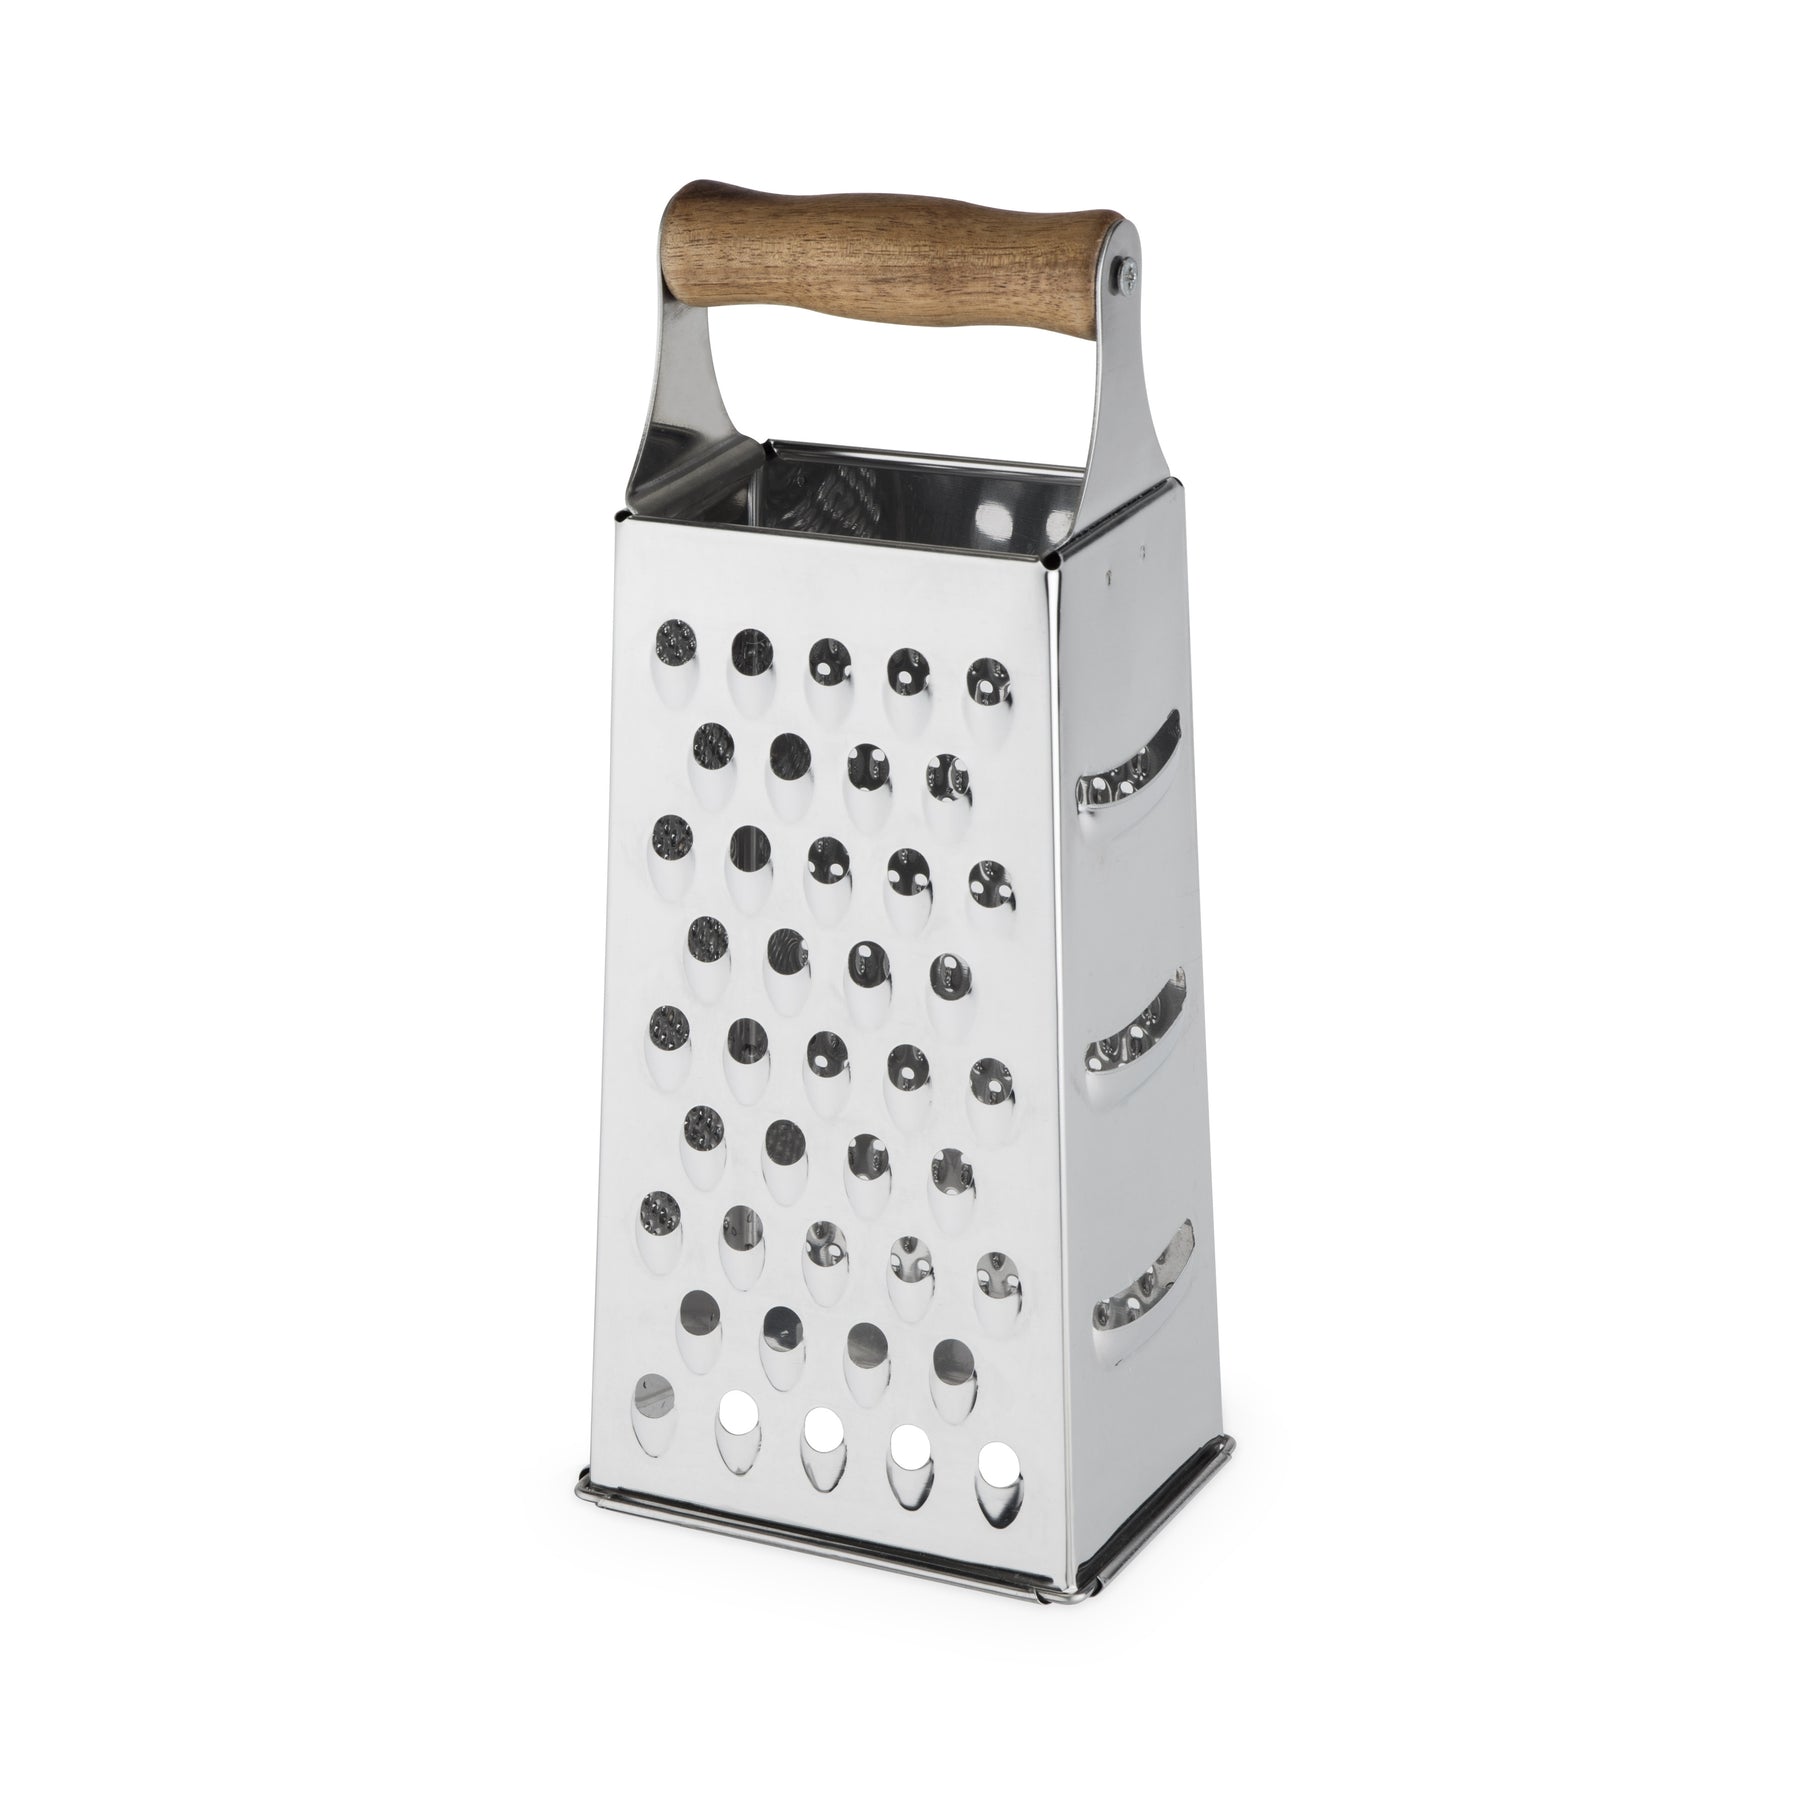 4 SIDED BOX GRATER AND 2 BOXES